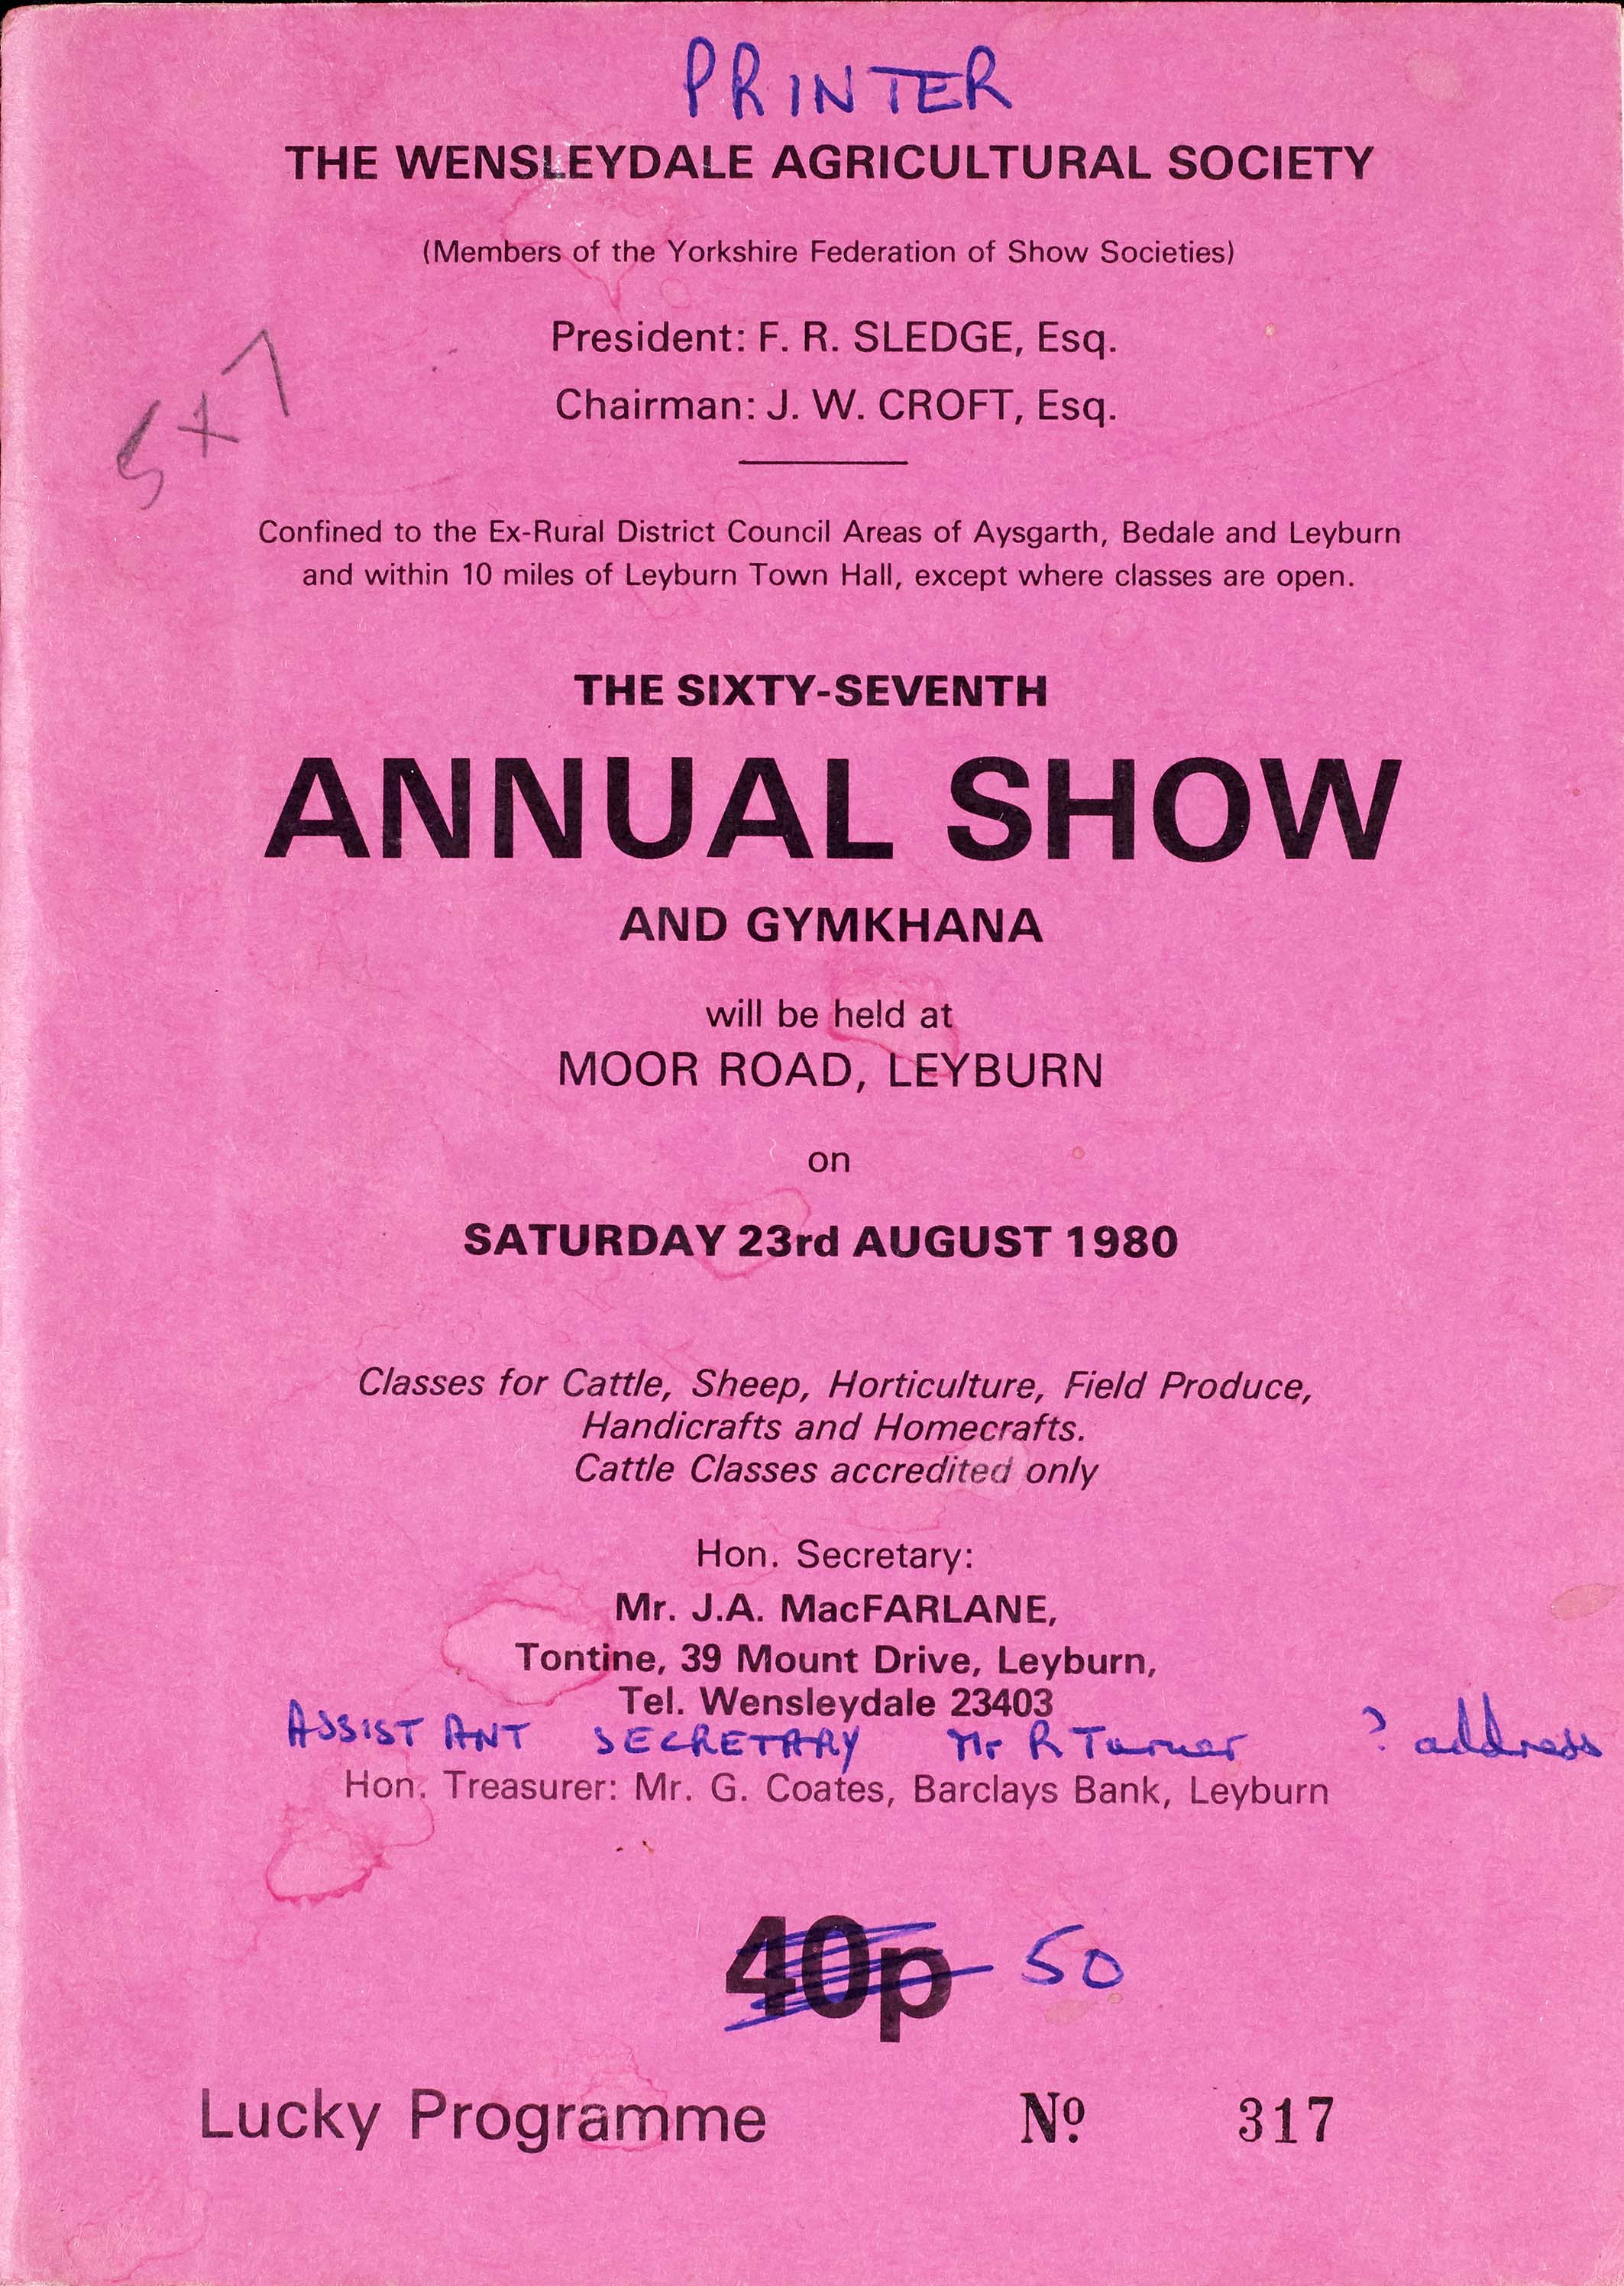 The programme cover for the 1980 Wensleydale Show, held at Leyburn each August.